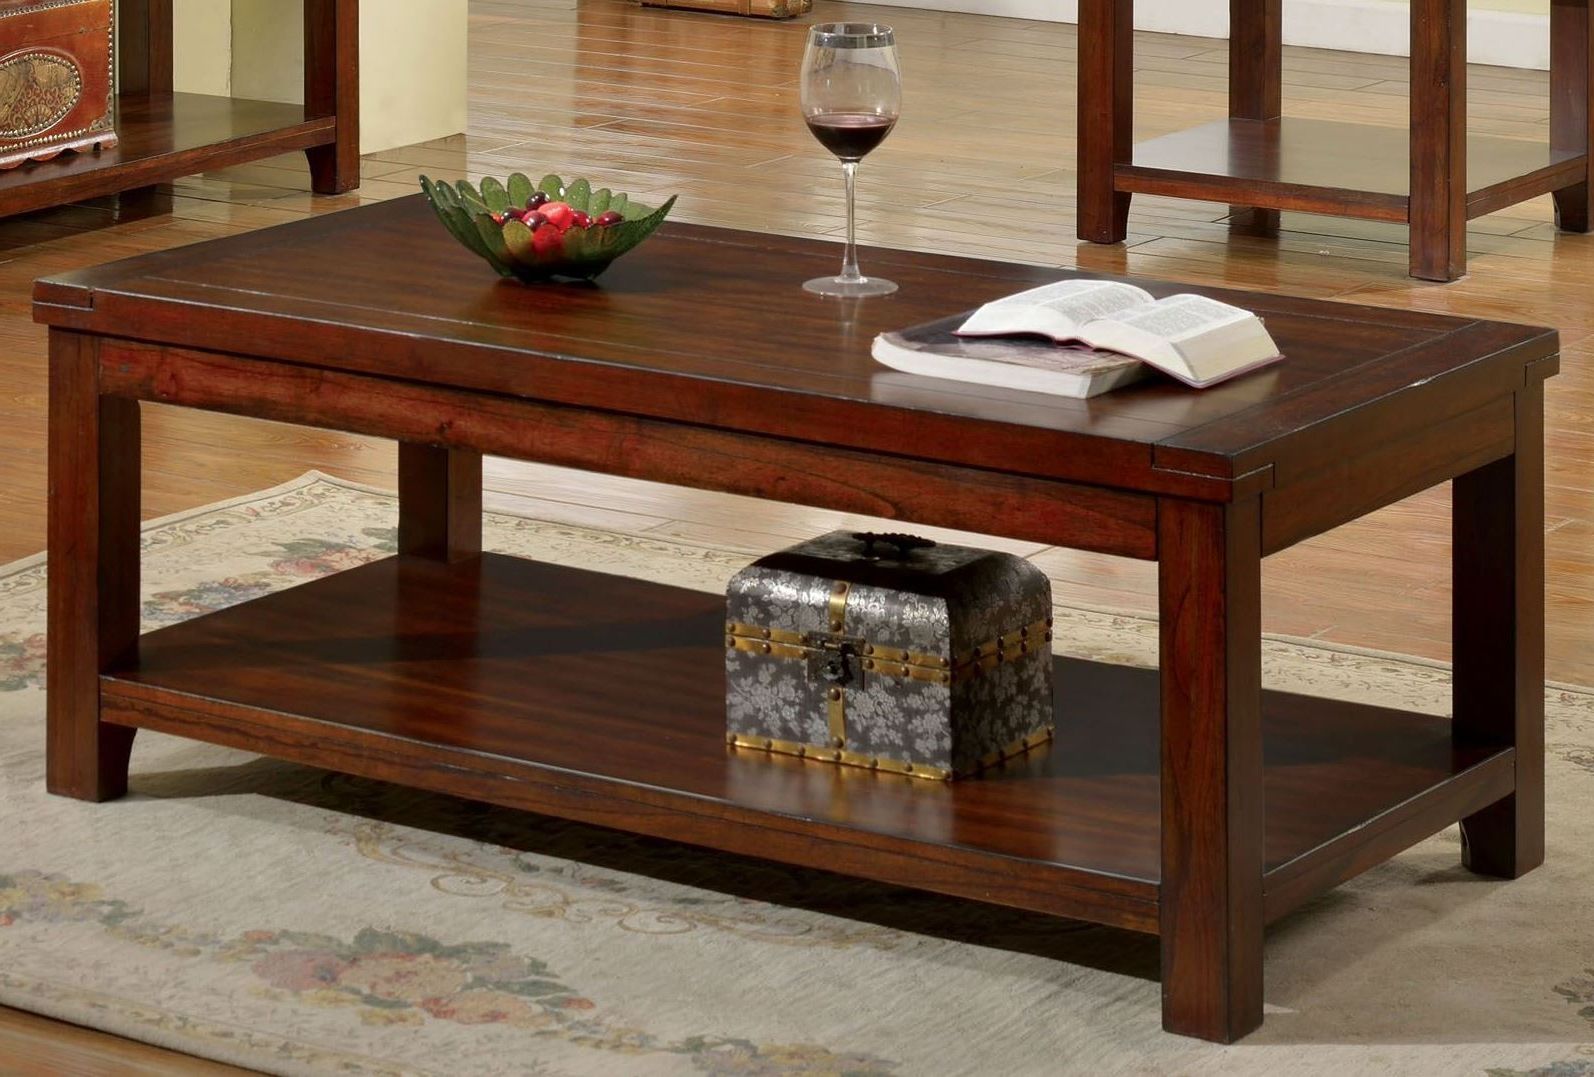 Recent Heartwood Cherry Wood Coffee Tables Pertaining To Estell Cherry Coffee Table From Furniture Of America (View 2 of 20)